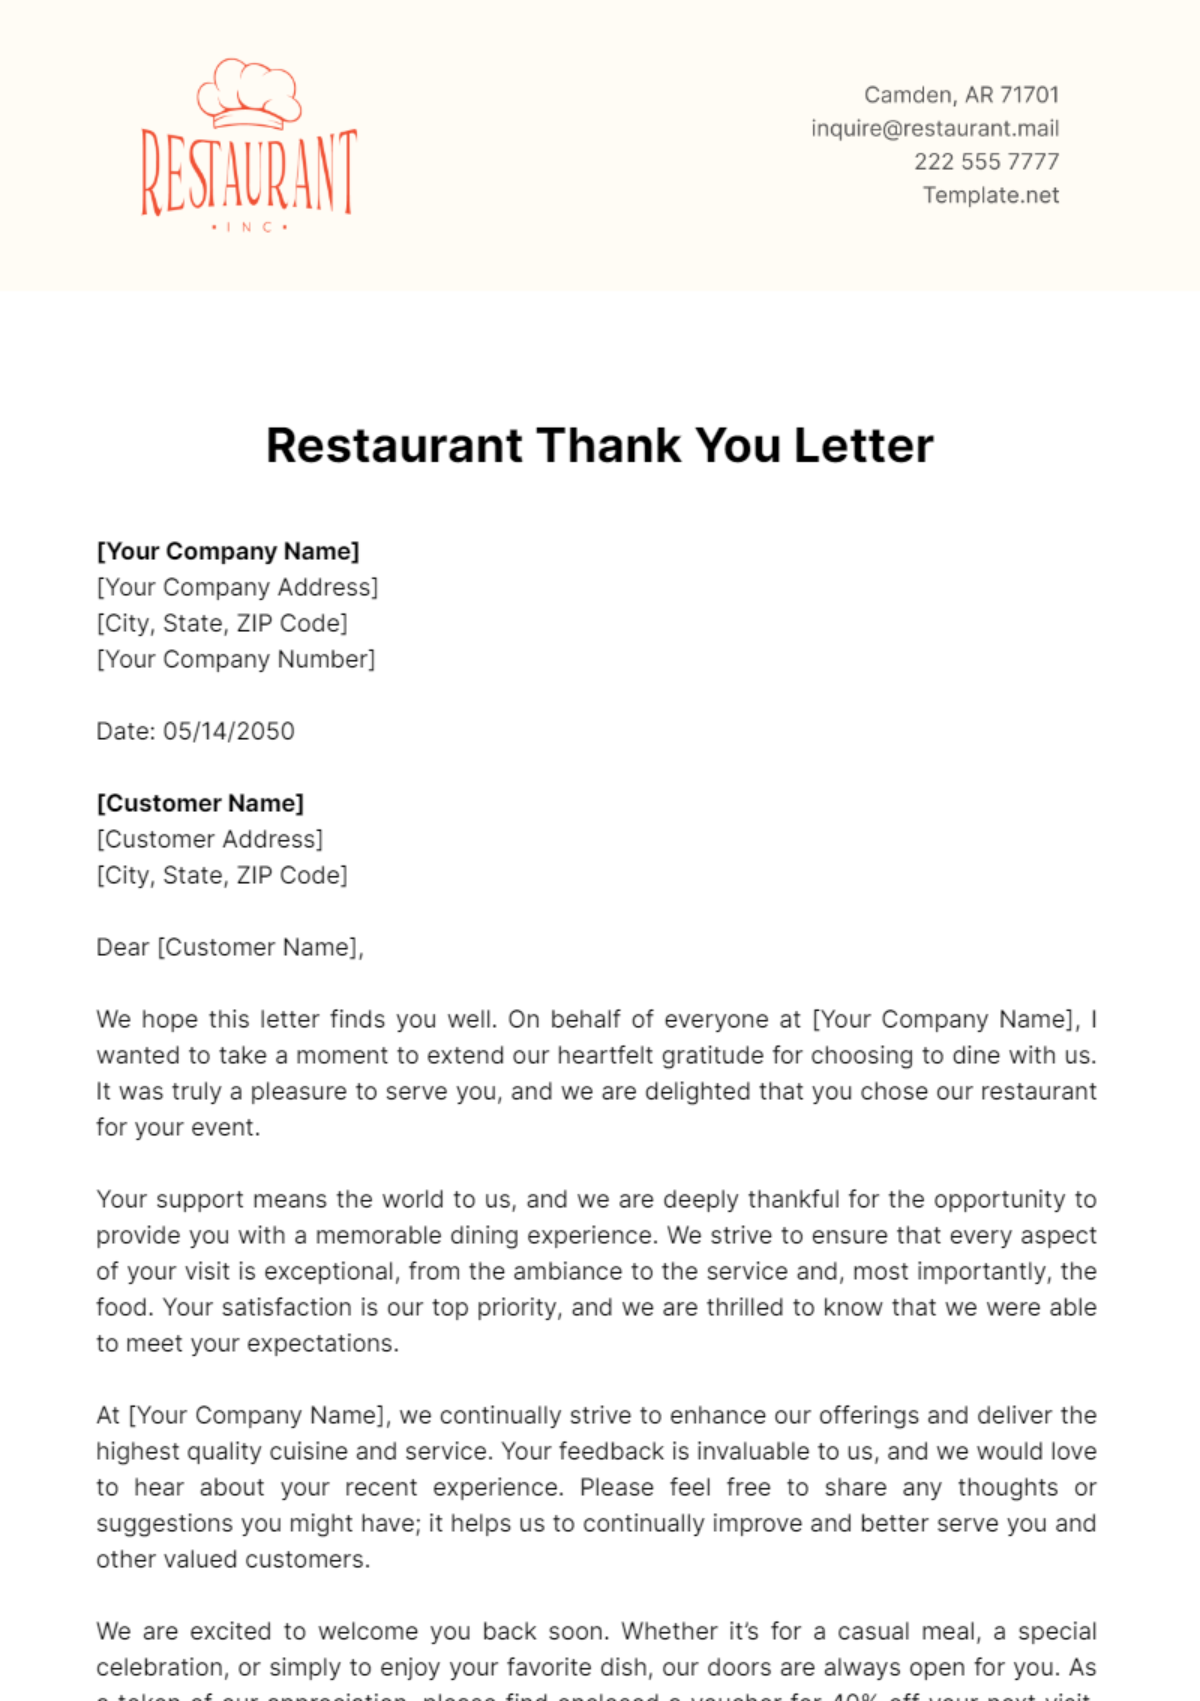 Free Restaurant Thank You Letter Template